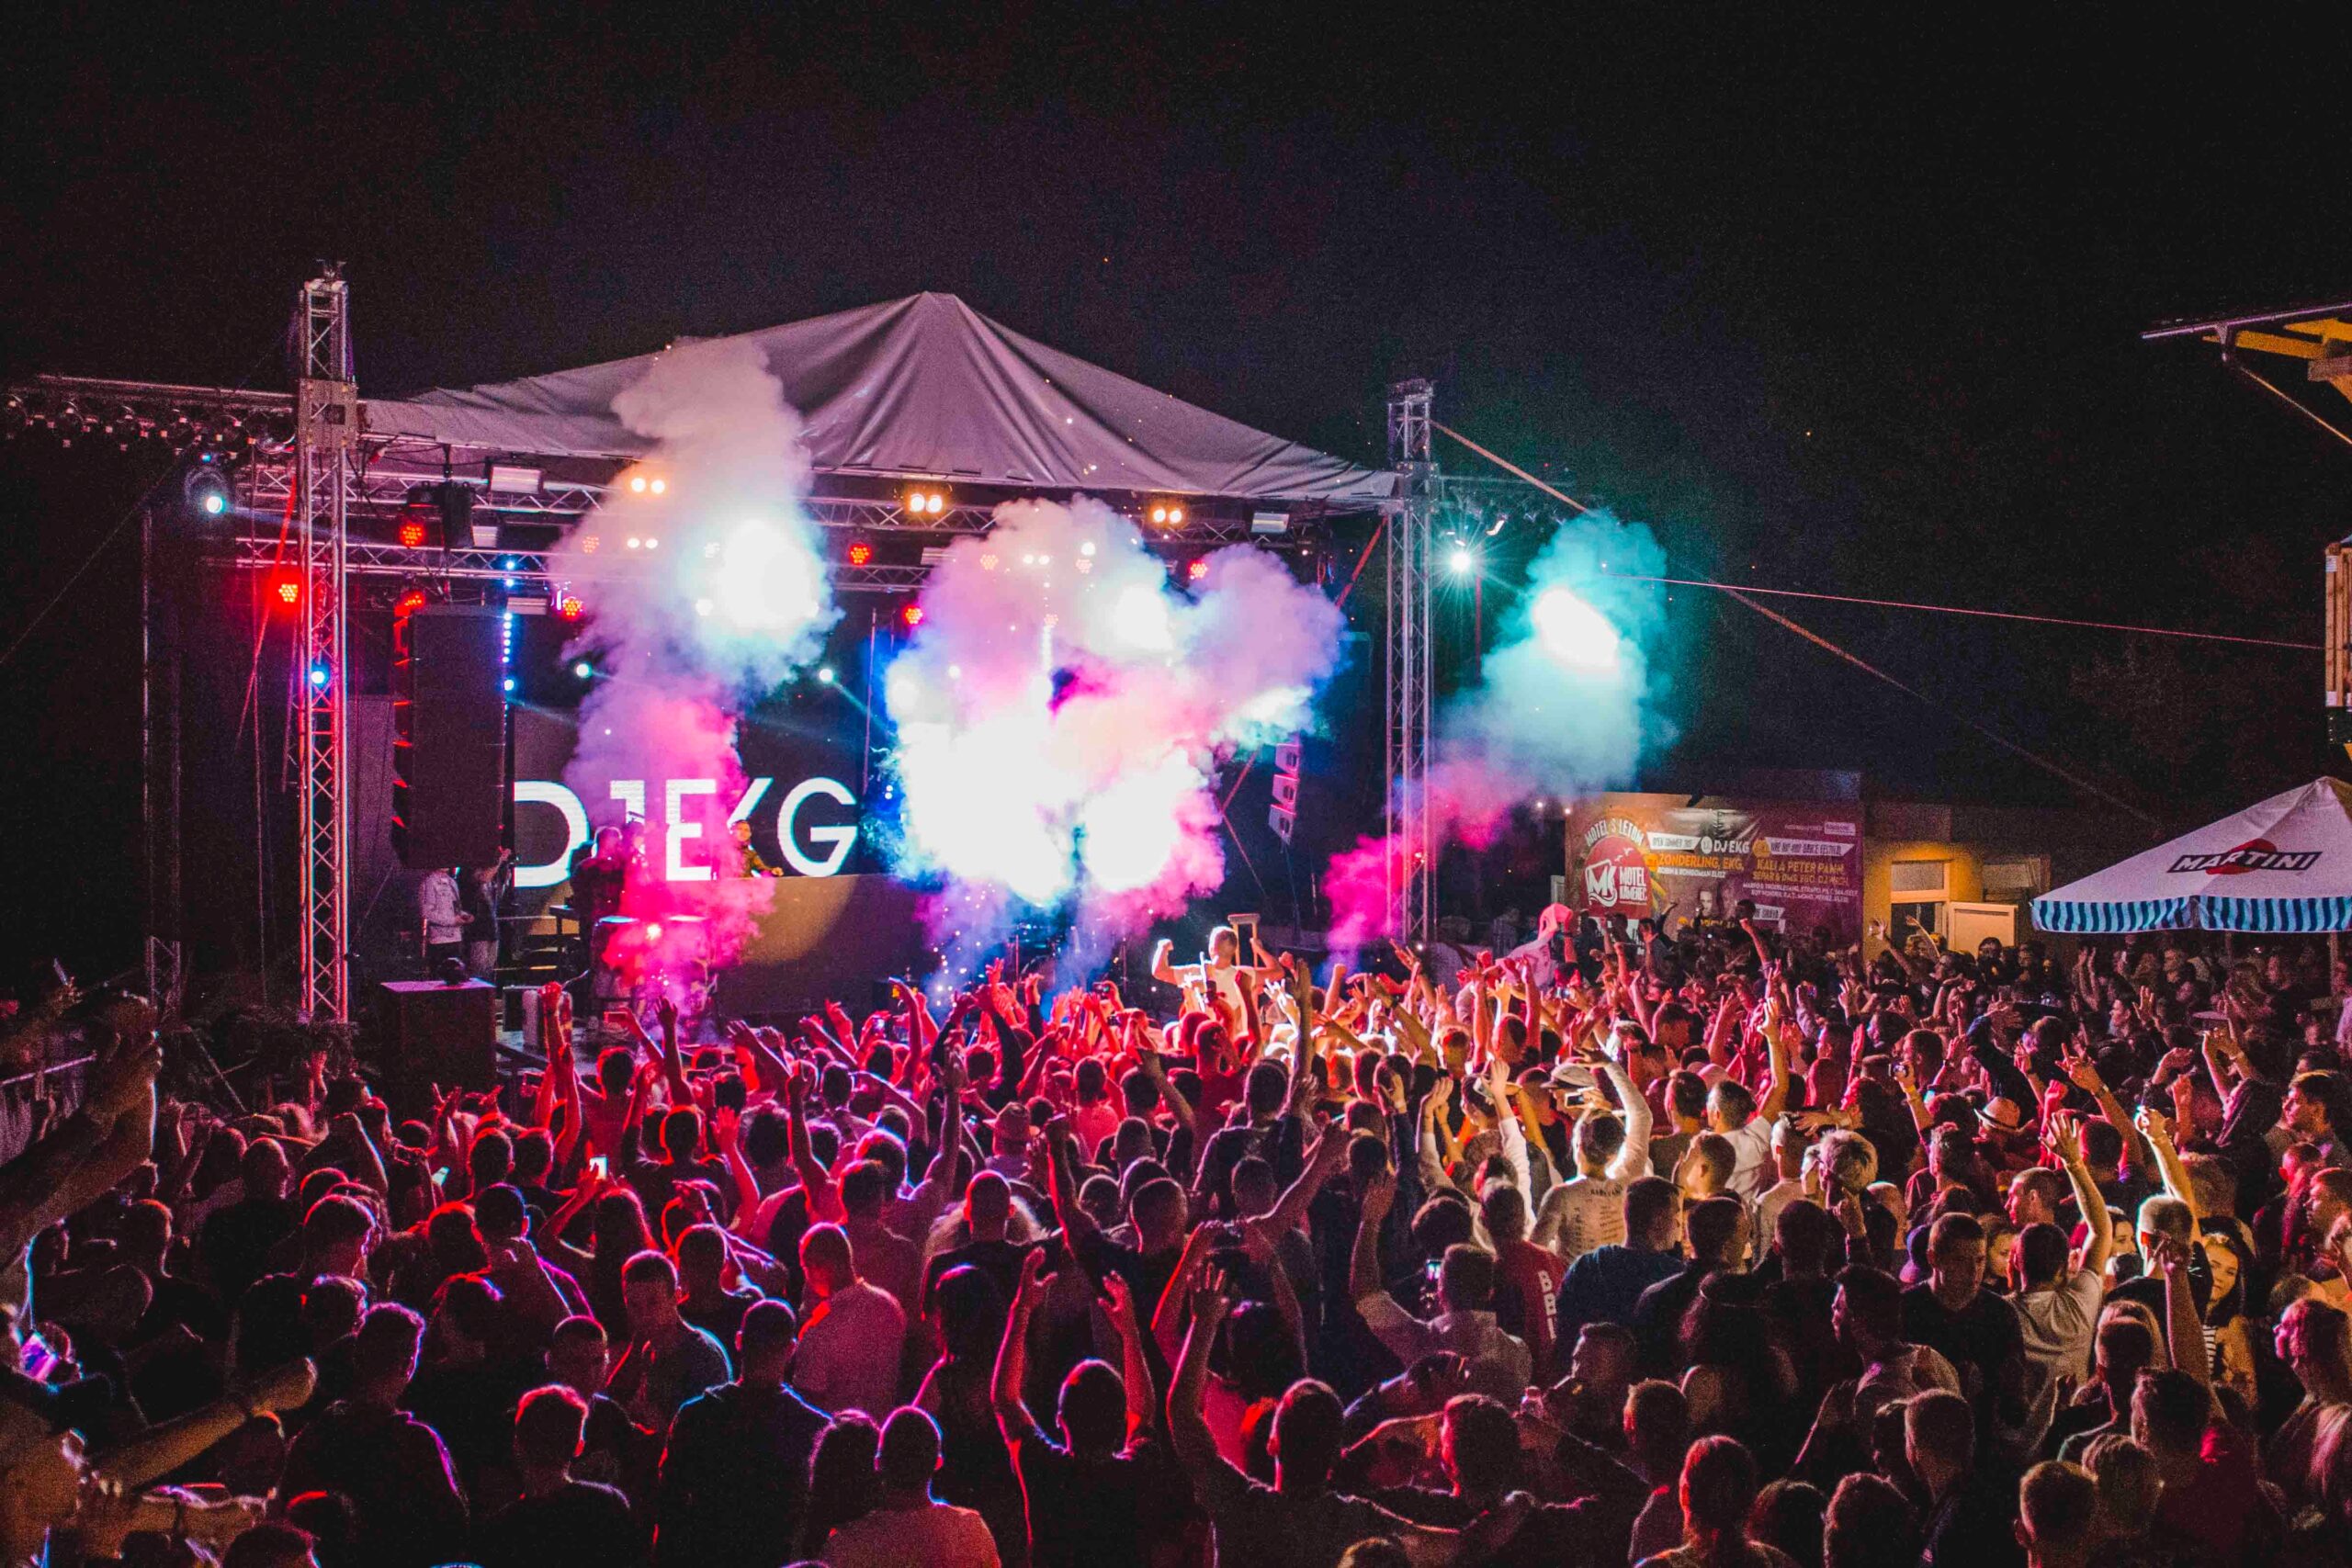 Festival essentials - the 10 items you NEED to pack